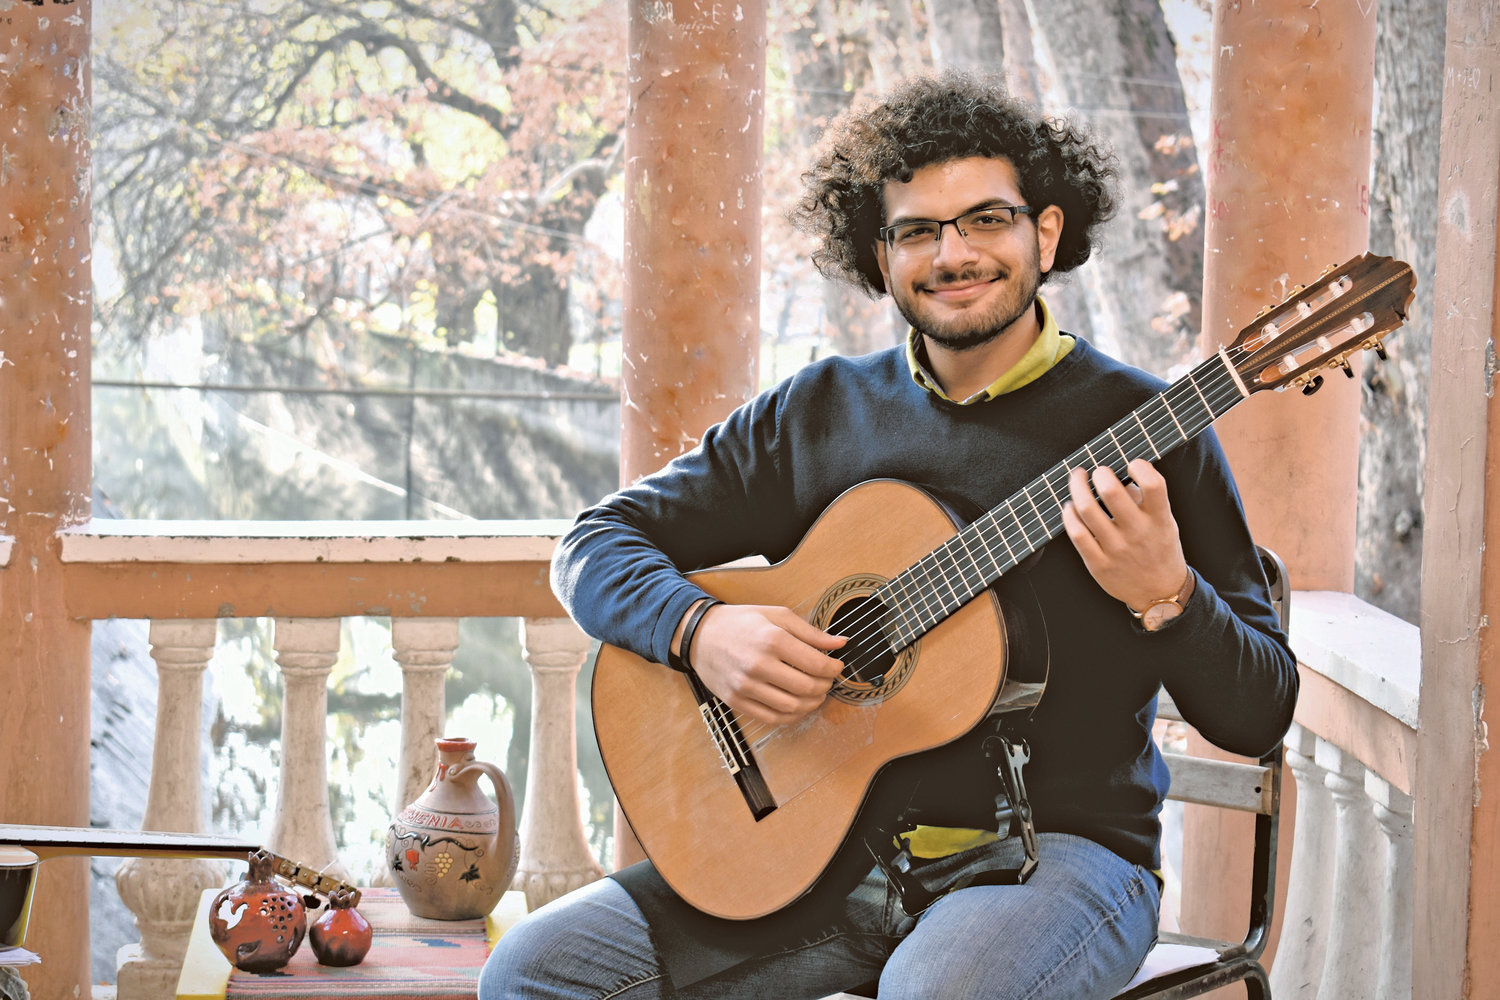 Saro Babikian began his musical career in Damascus, but he emigrated to California at the onset of the Syrian civil war in 2012.